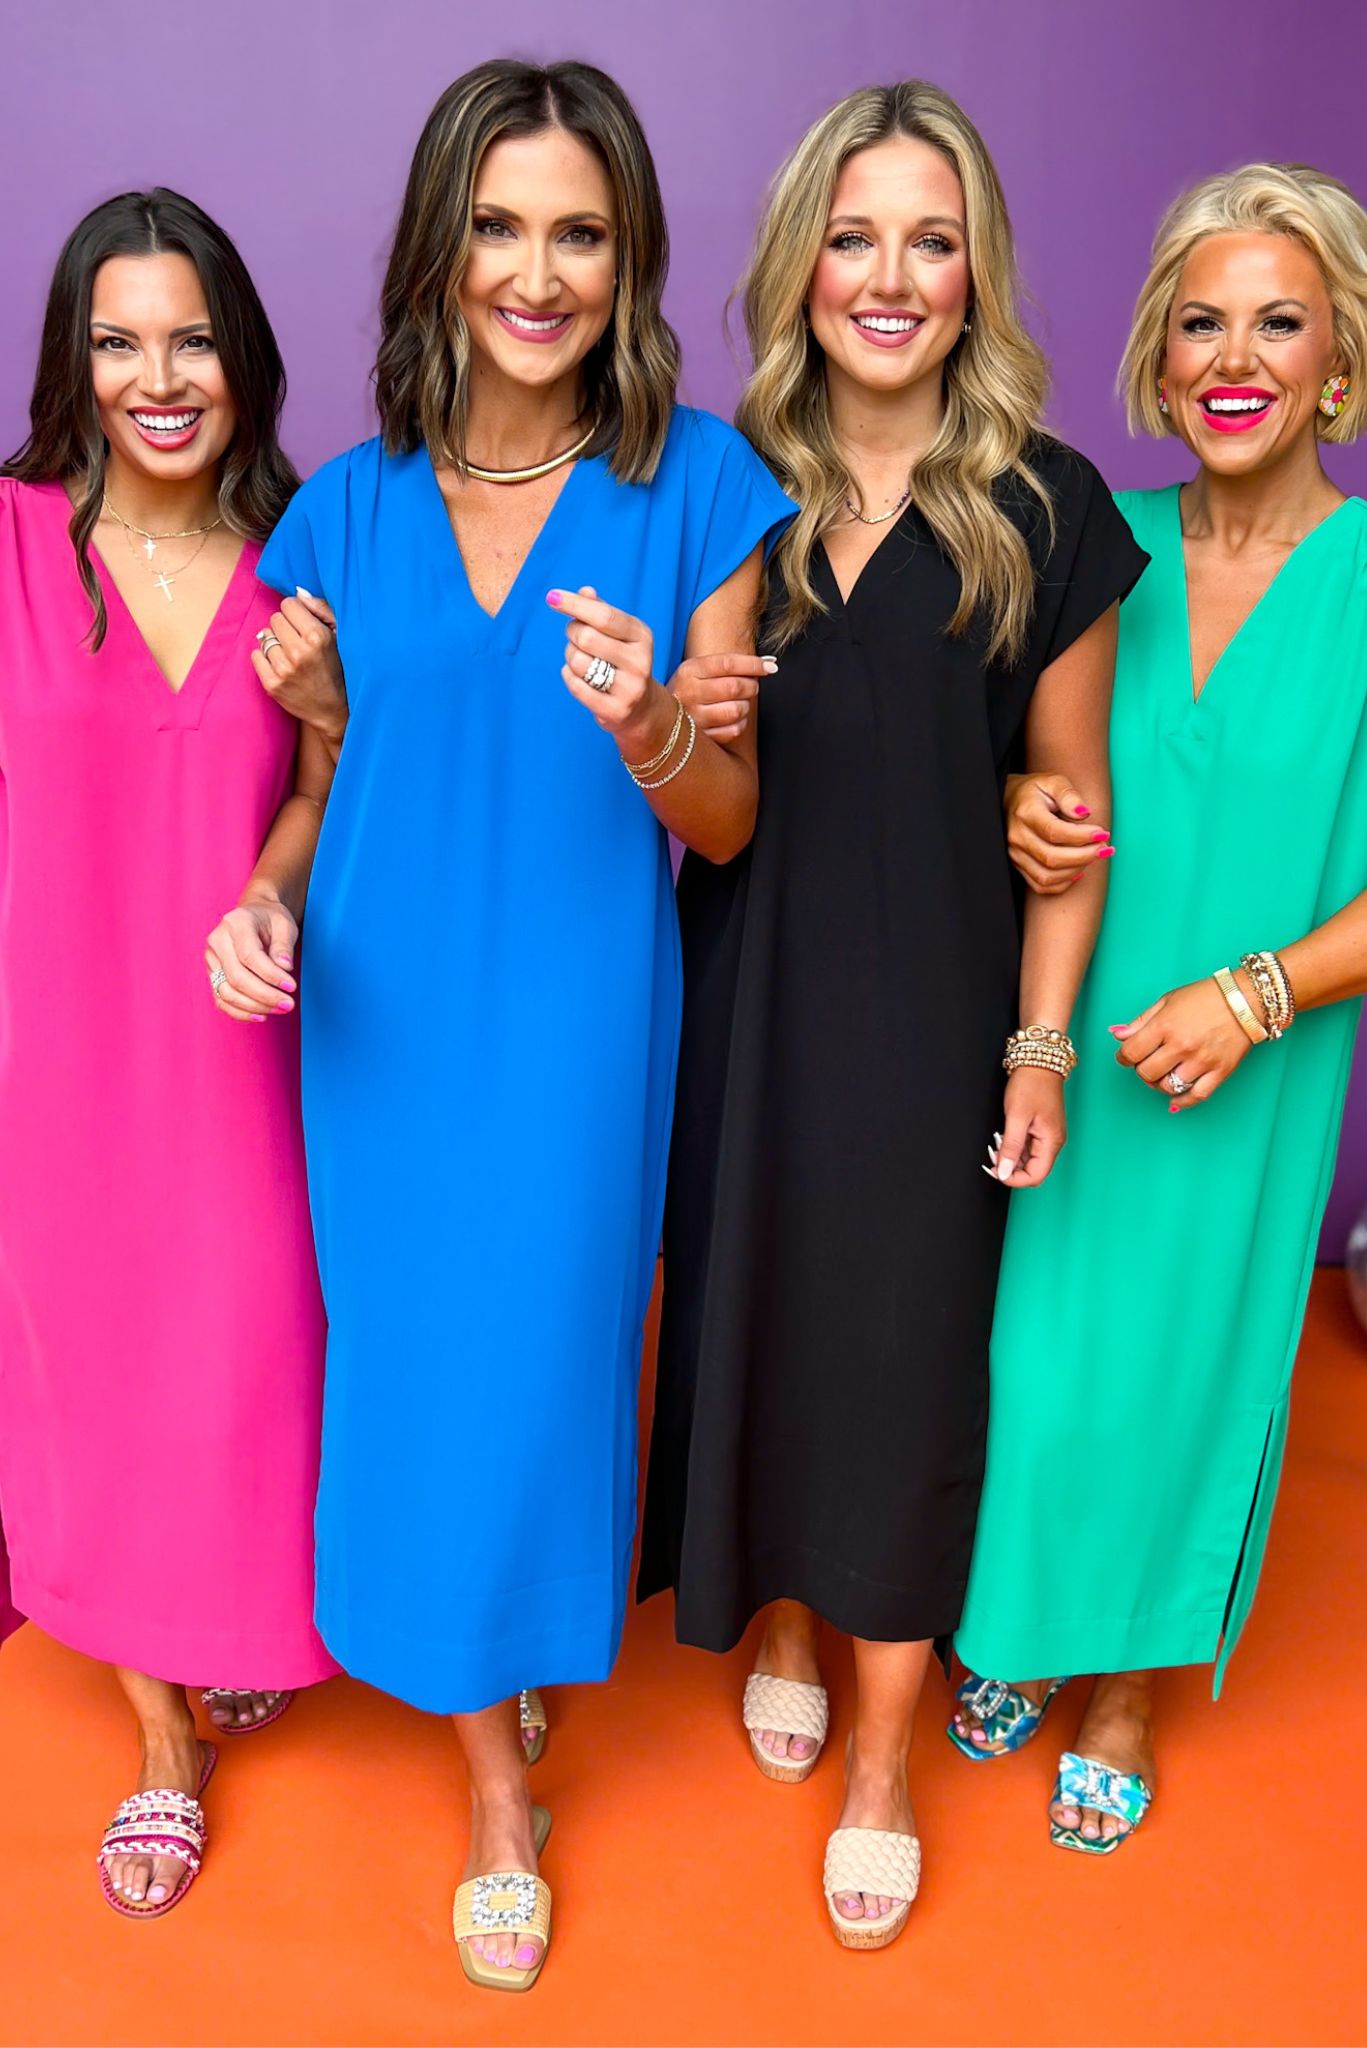 SSYS The Iris Maxi Dress In Royal, ssys the label, the iris dress, ssys dress, elevated dress, must have dress, maxi dress, everyday dress, summer dress, summer style, shop style your senses by Mallory Fitzsimmons, ssys by Mallory Fitzsimmons  Edit alt text